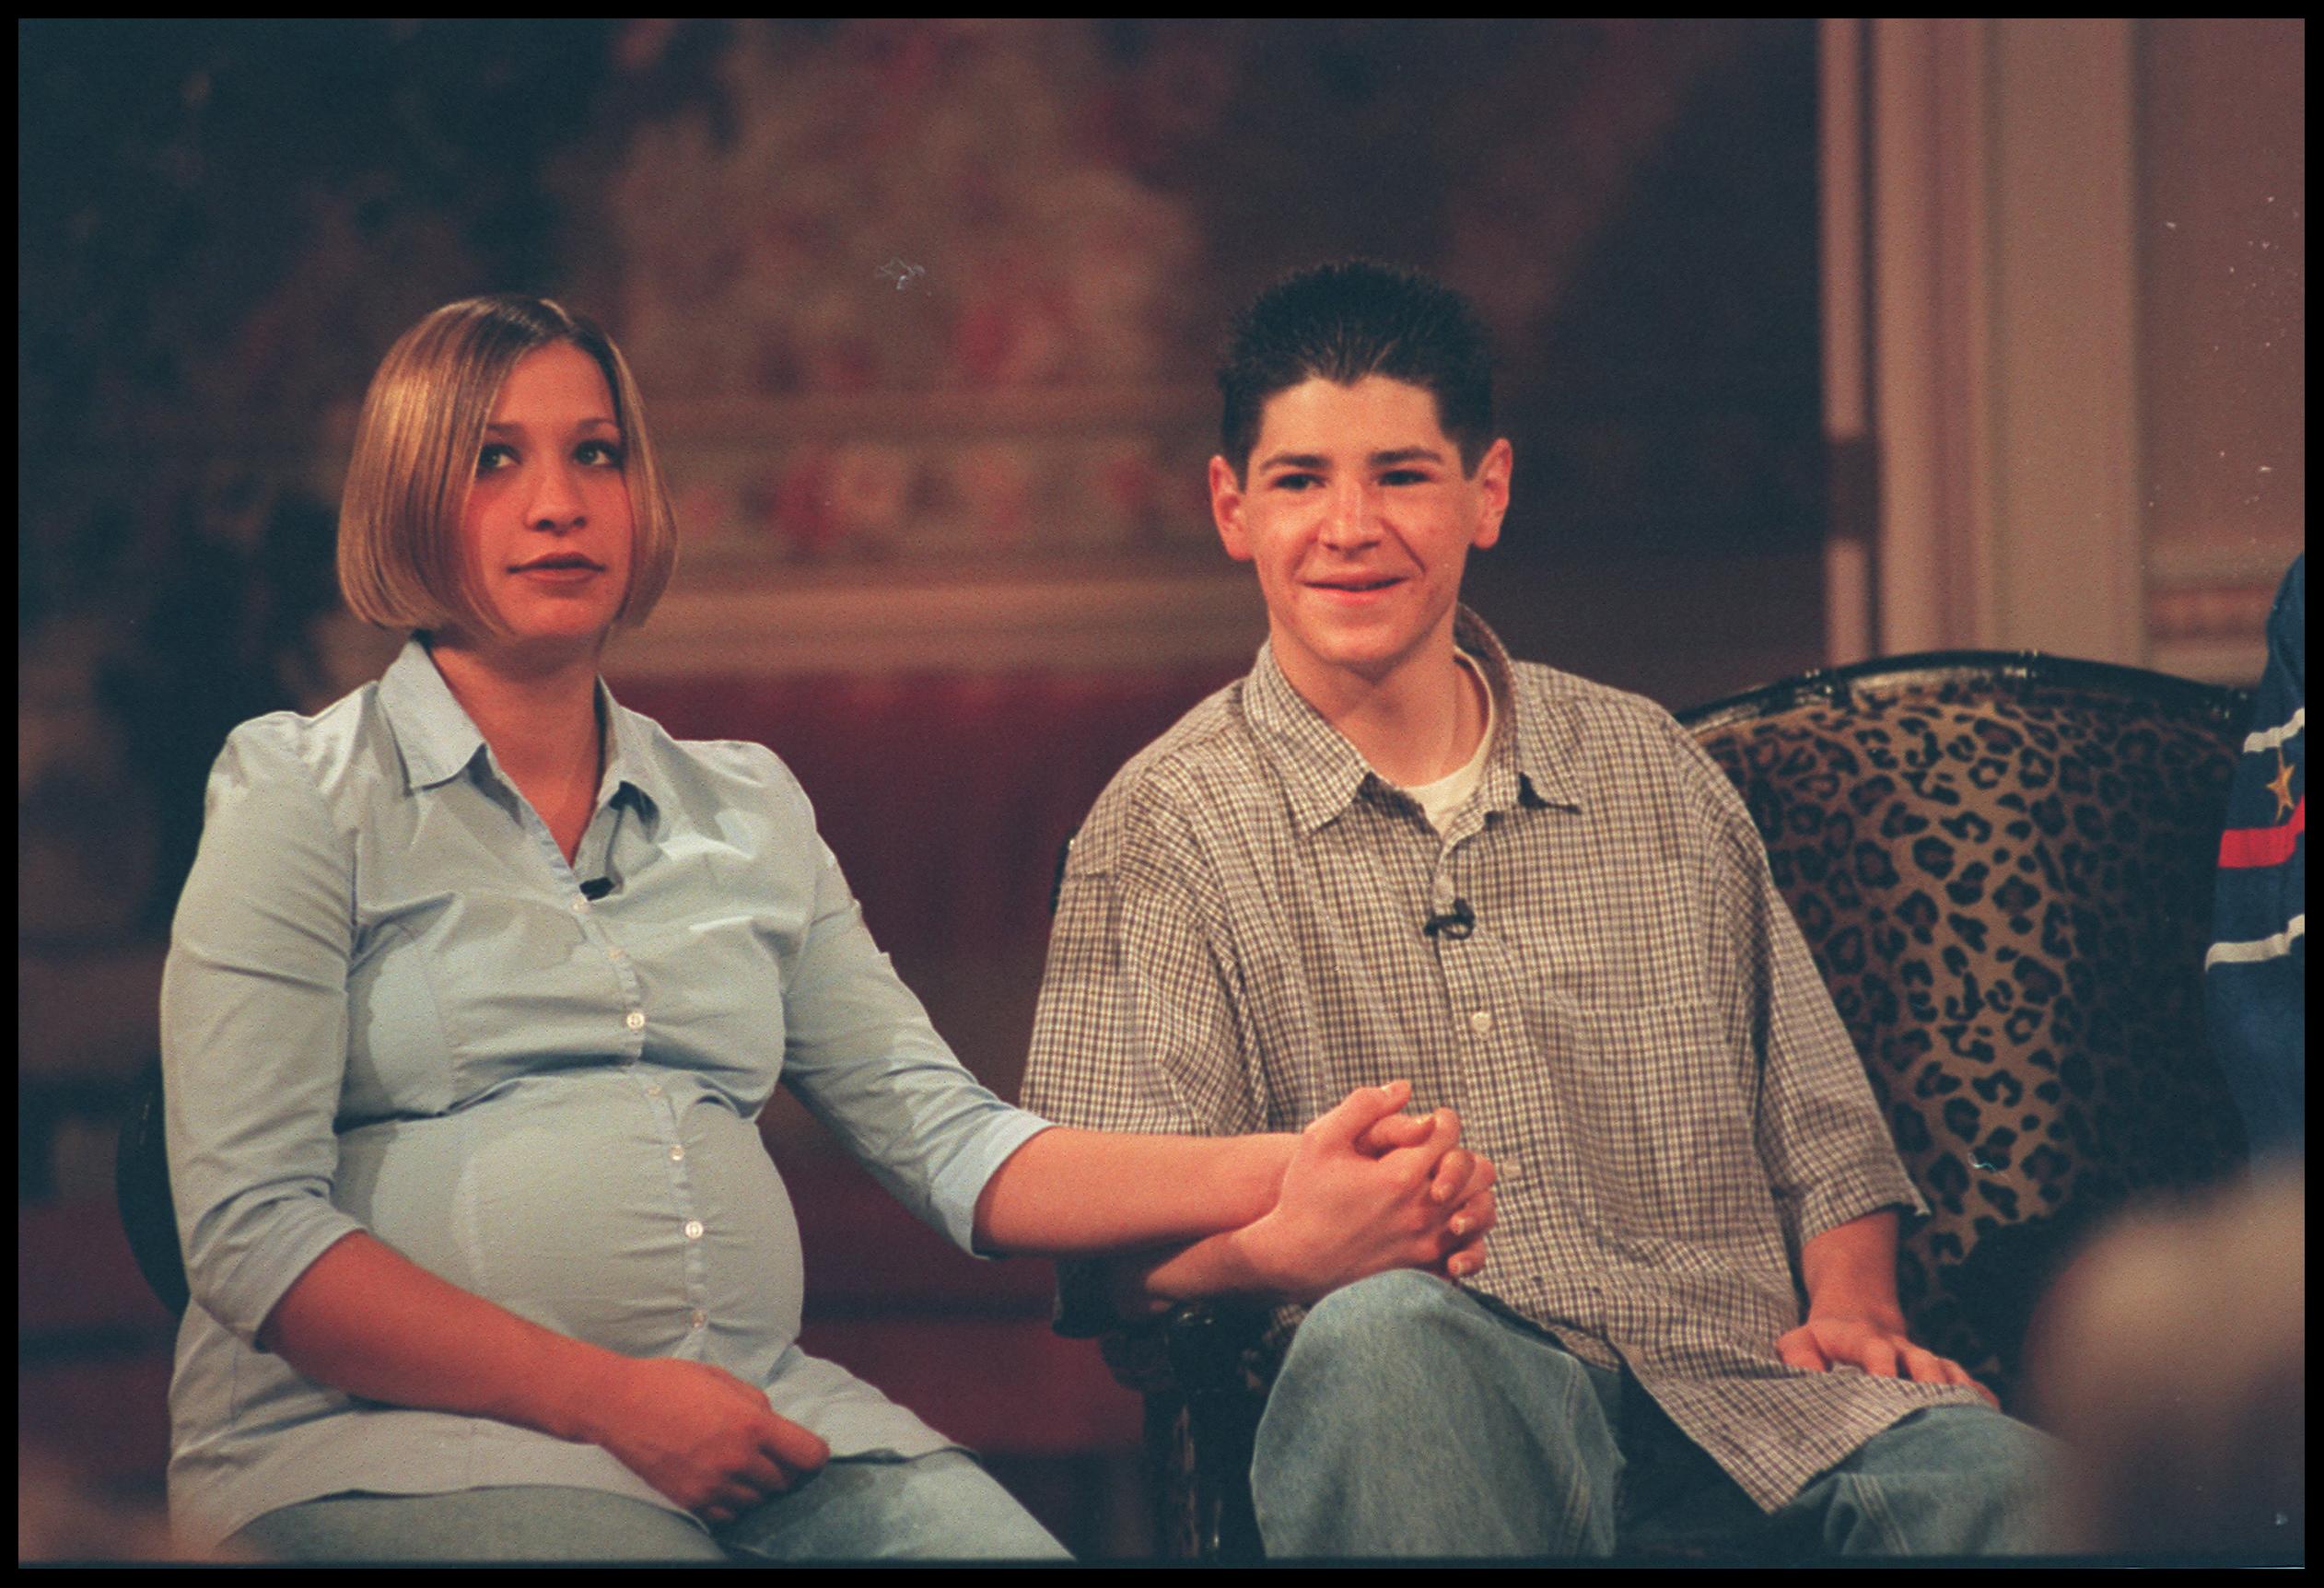 Michael Fishman's Exwife and Kids Inside the 'Roseanne' Star's Family